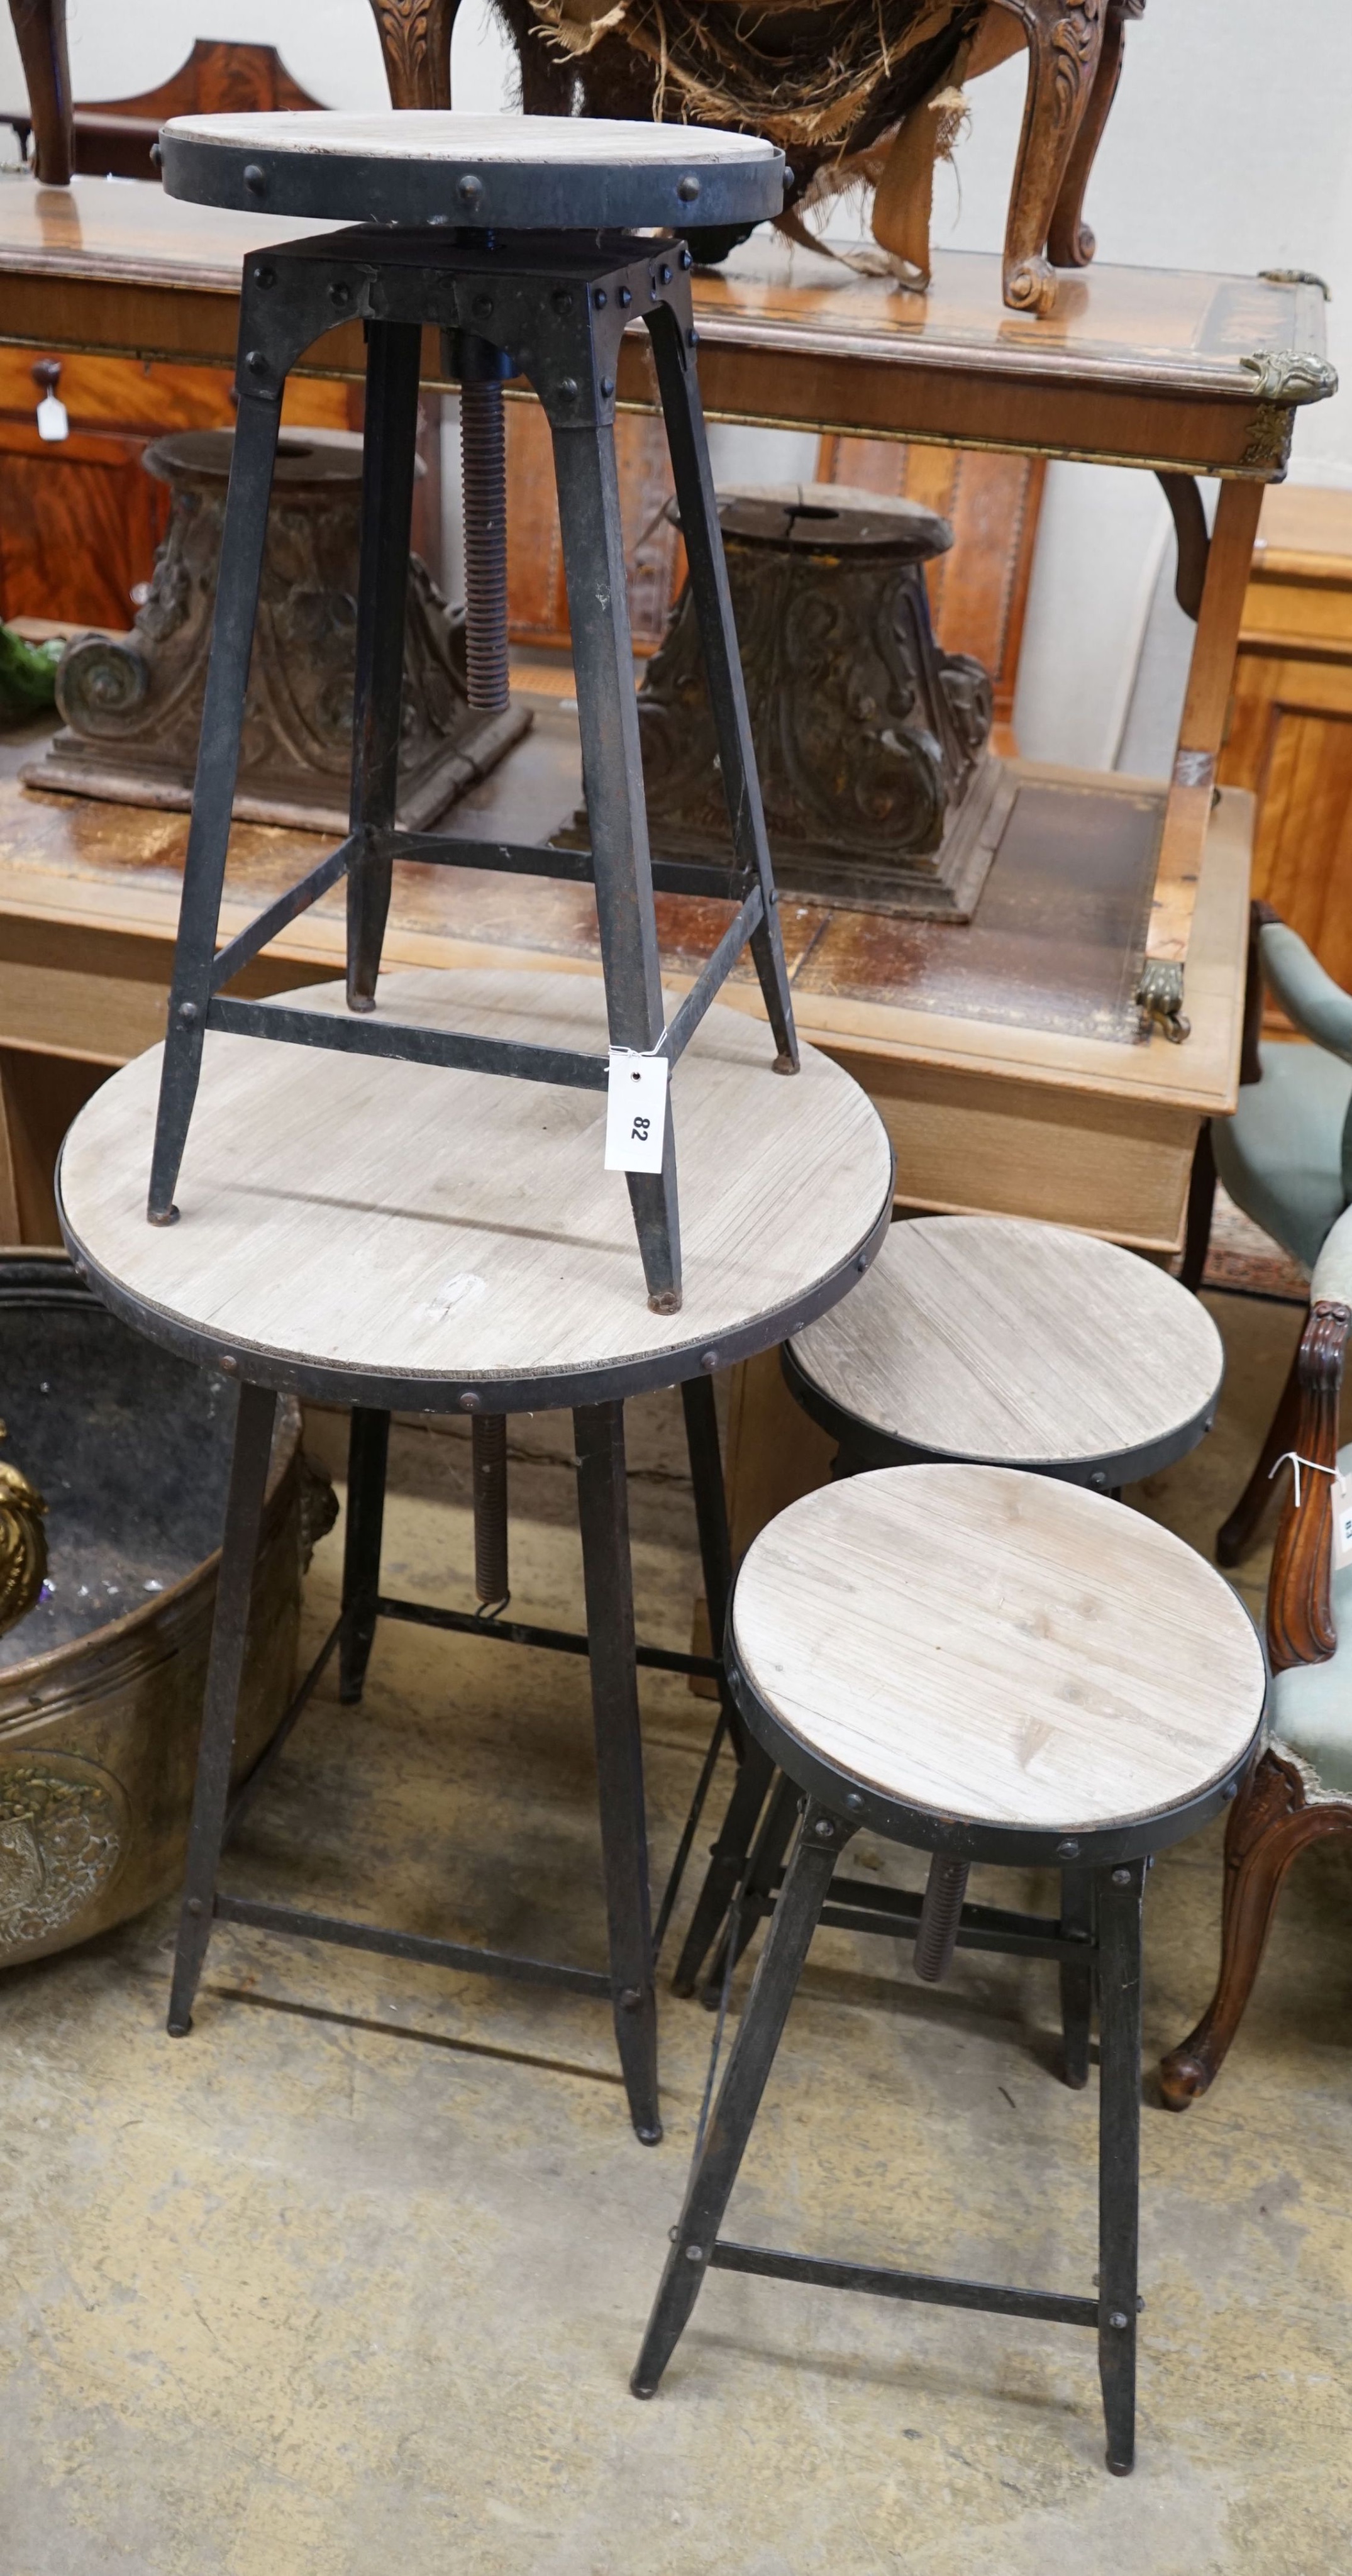 An industrial style circular adjustable table, diameter 60cm, together with three matching stools